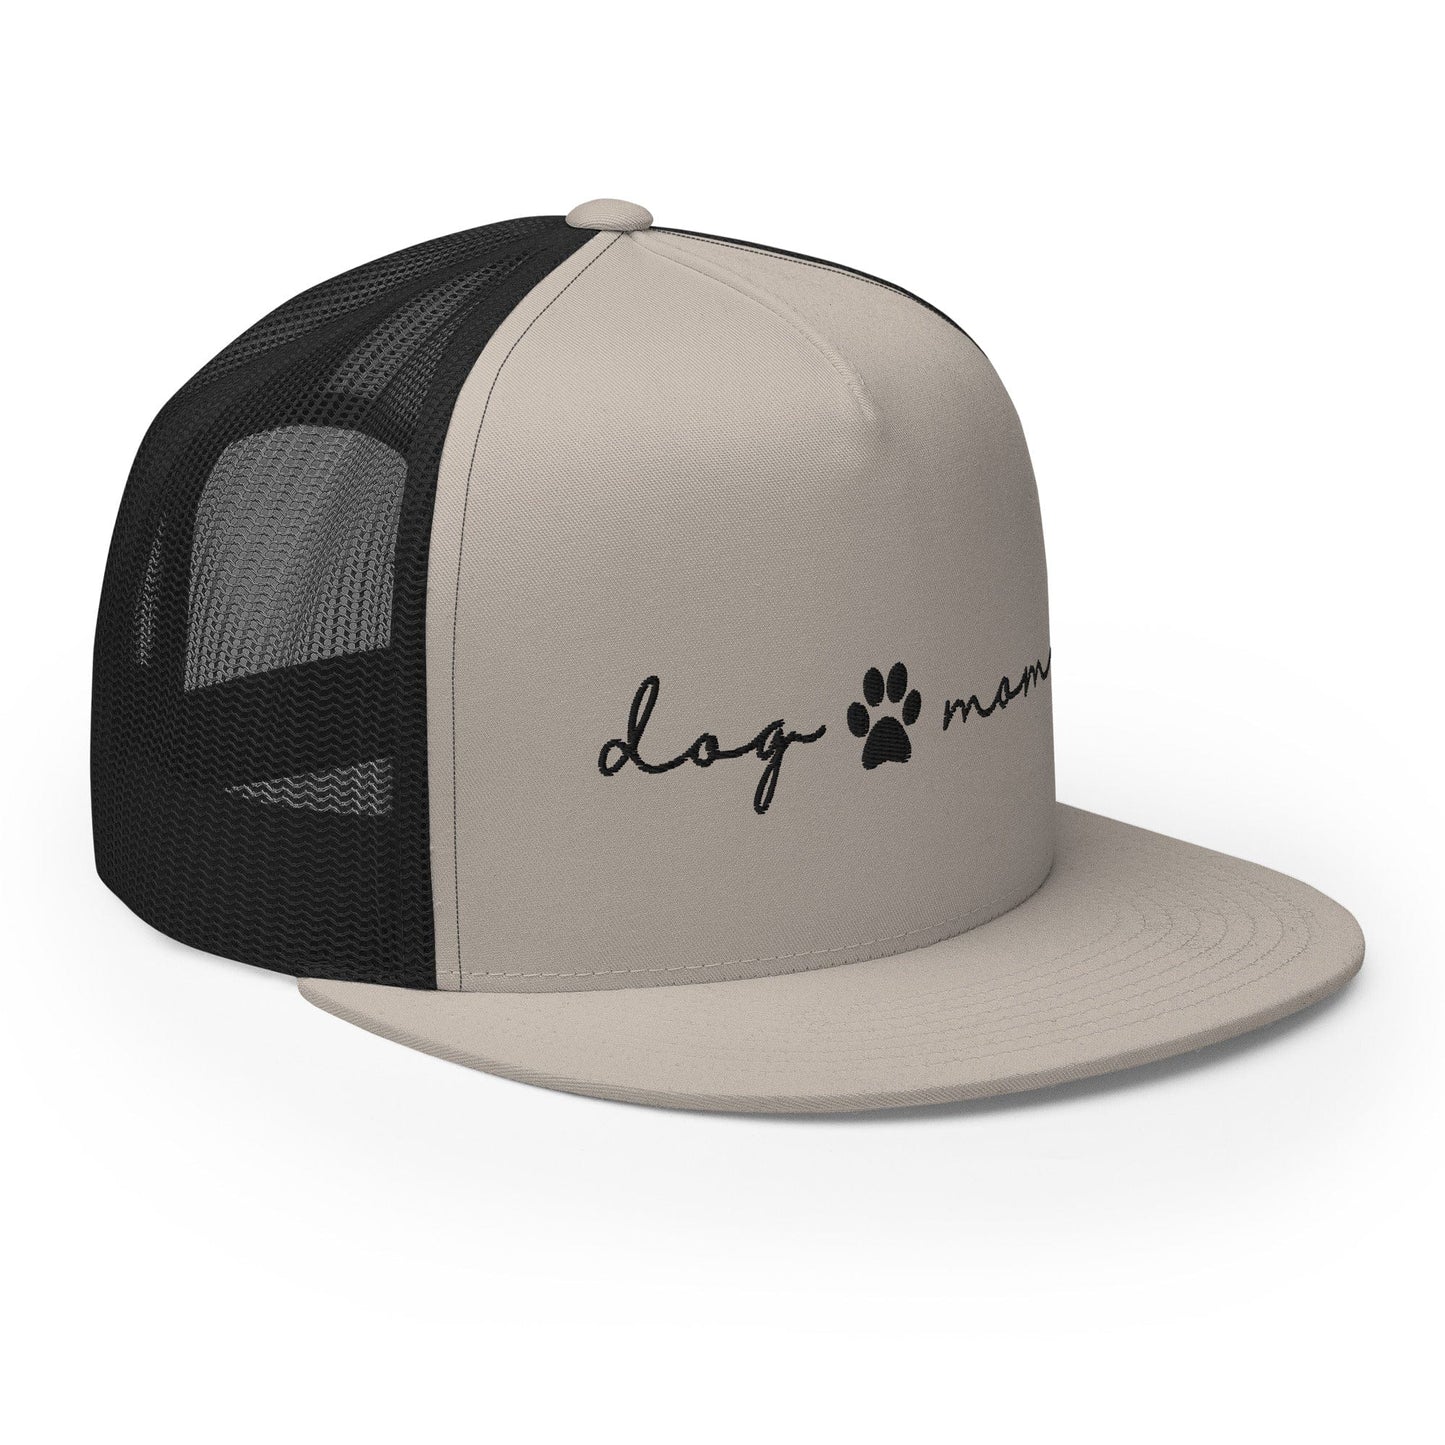 Trucker Hats for Proud Pet Parent: Stylish Statements for Dog Moms and Dads